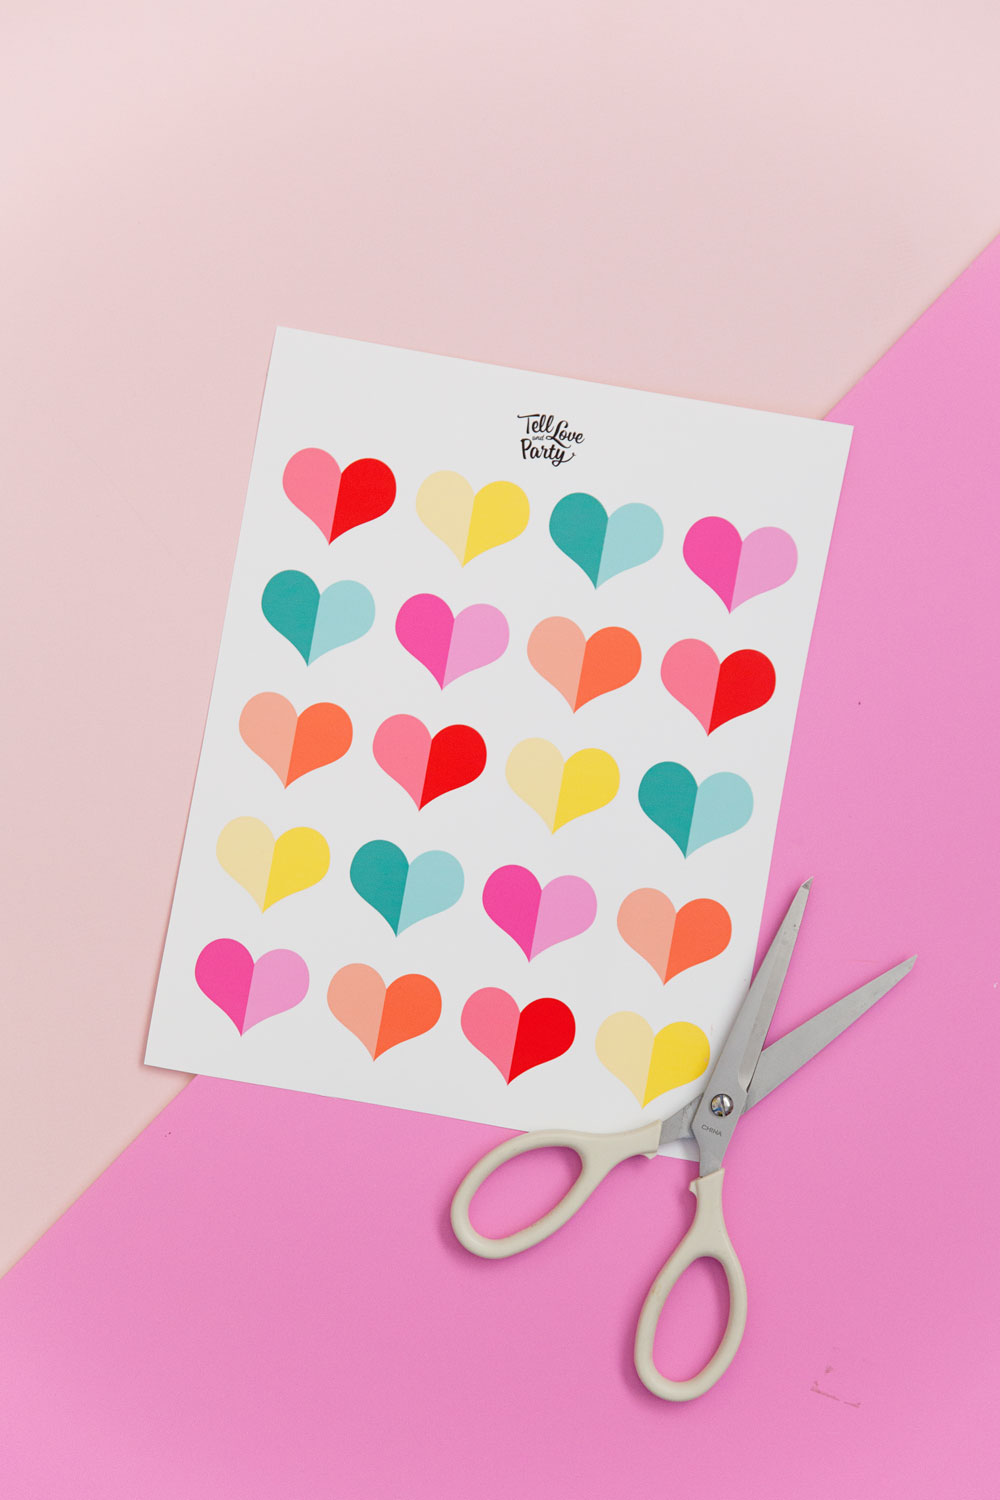 FREE printable heart cupcake toppers | TELL LOVE AND PARTY Valentine's day is coming up and these are perfect for class parties, office treats or just for friends! Either way don't leave those cupcakes plain and boring! -DIY -CAKE TOPPERS 